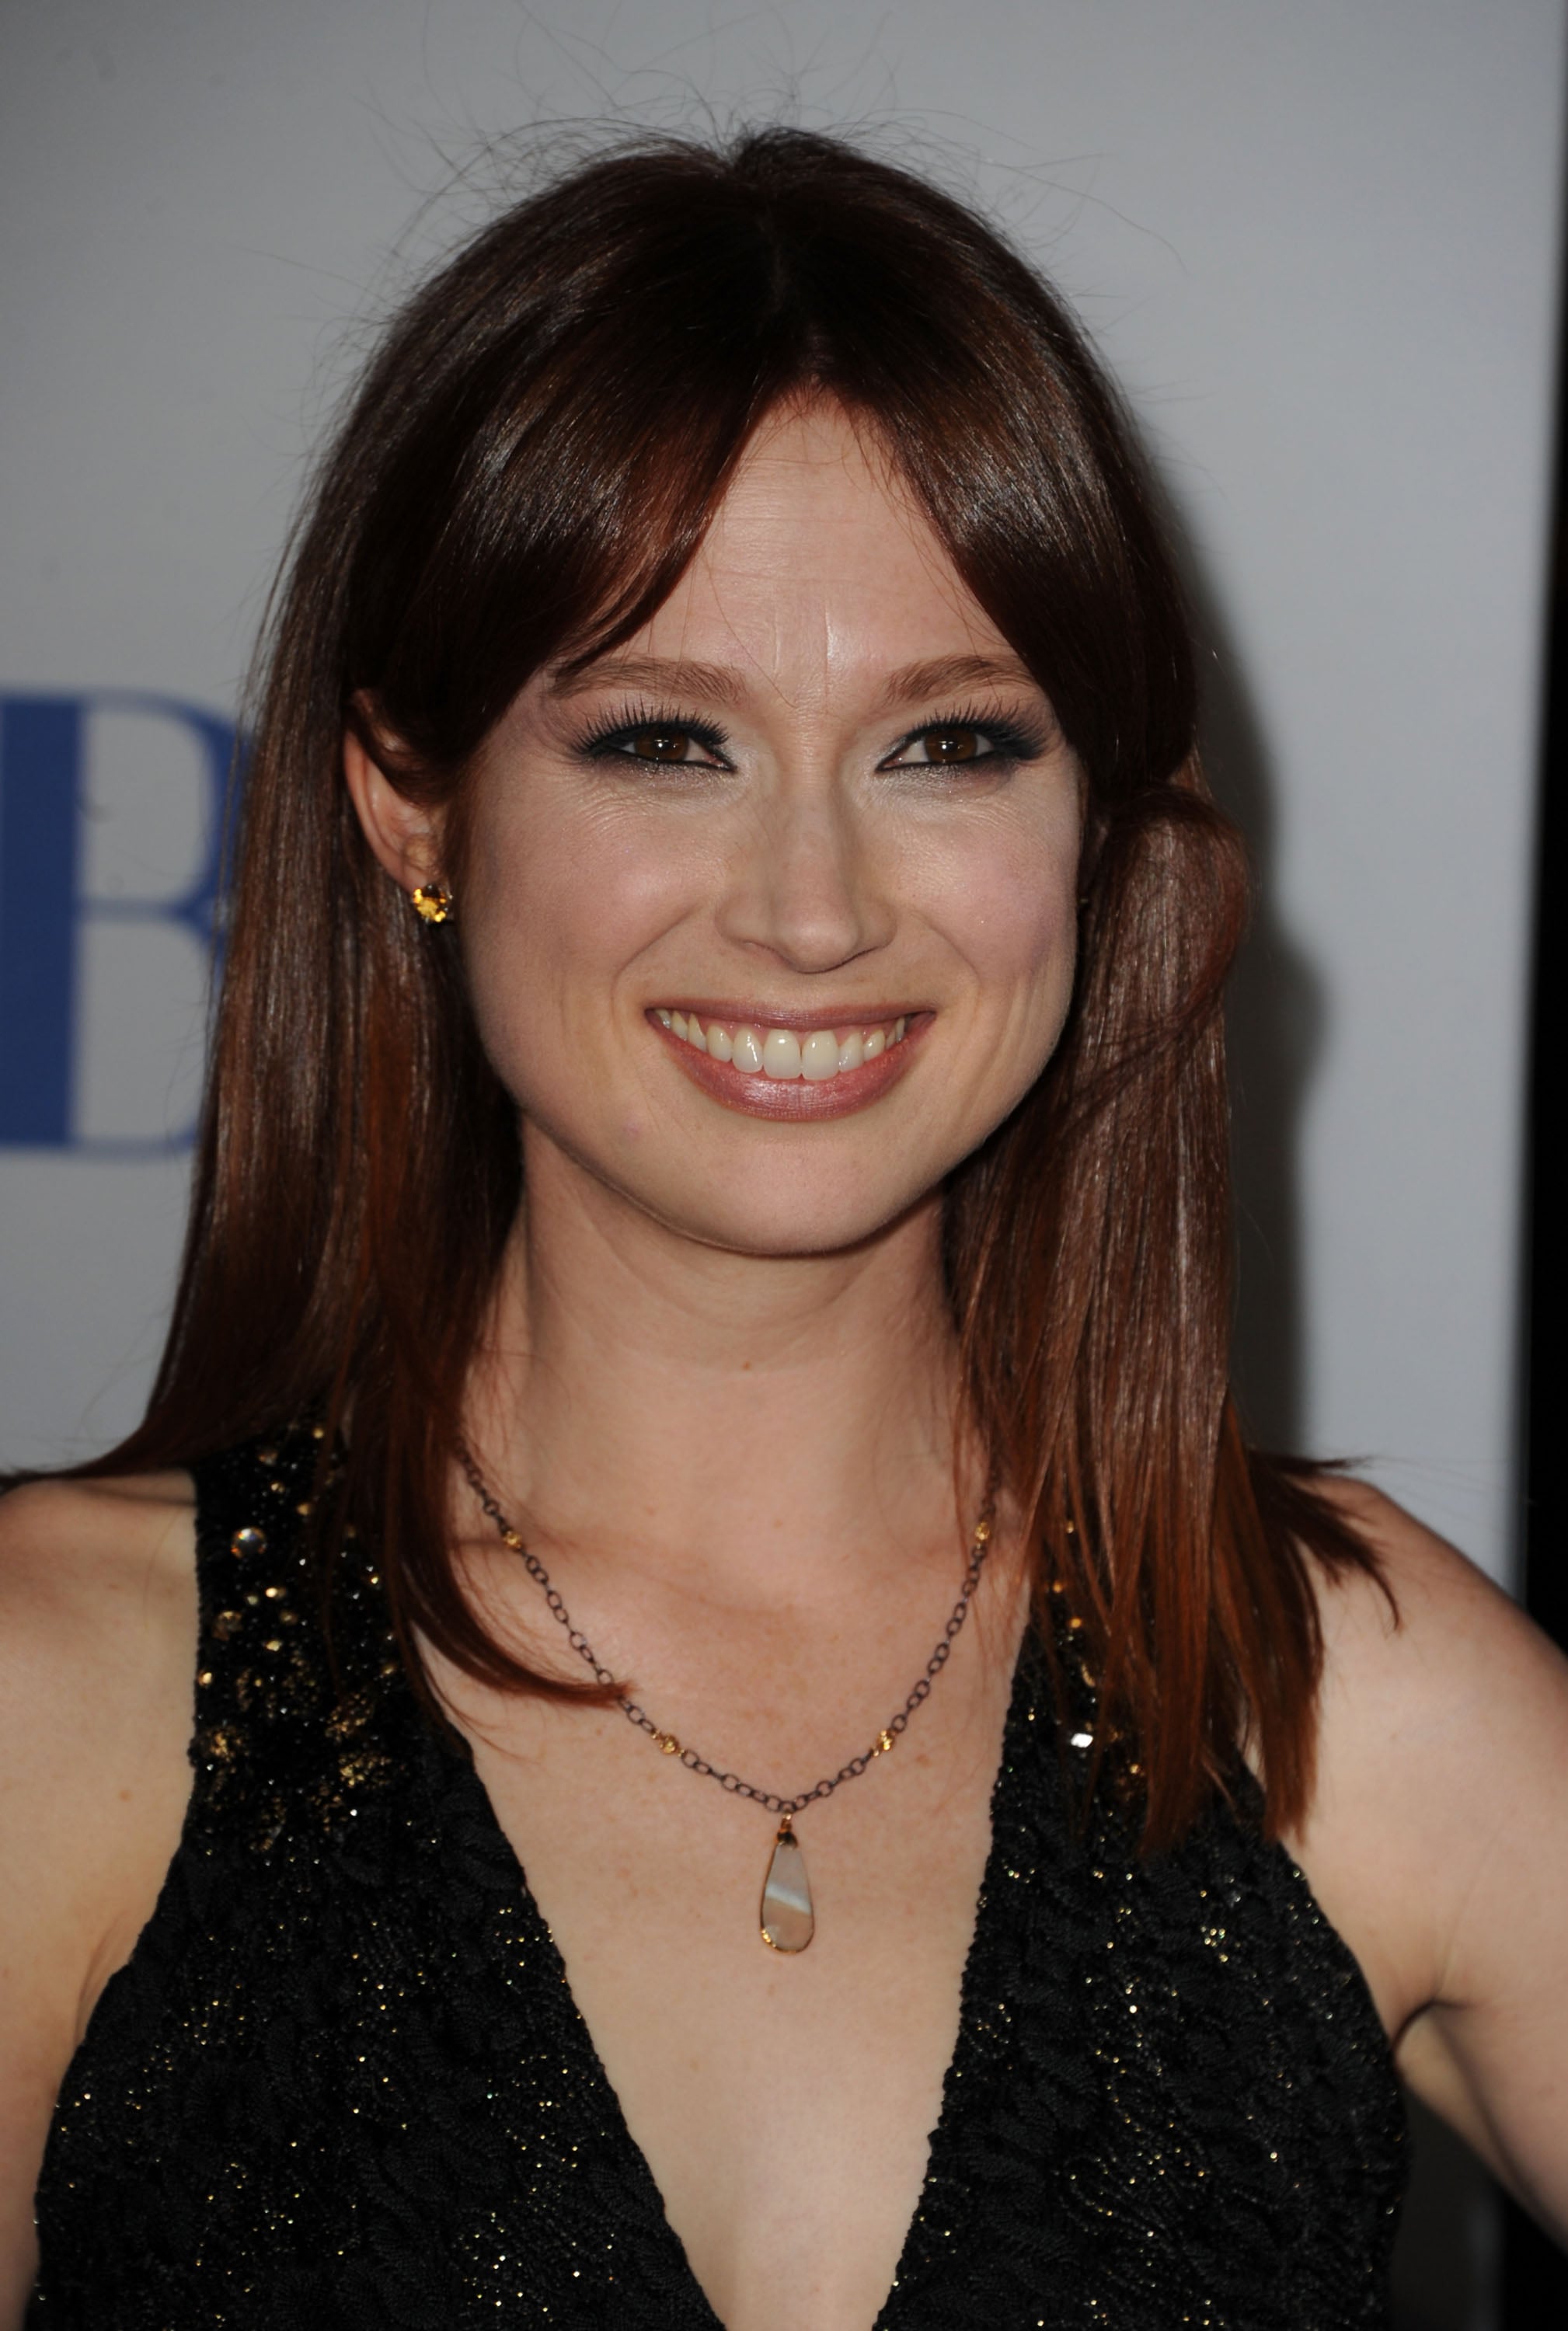 Ellie Kemper in black at the People's Choice Awards.